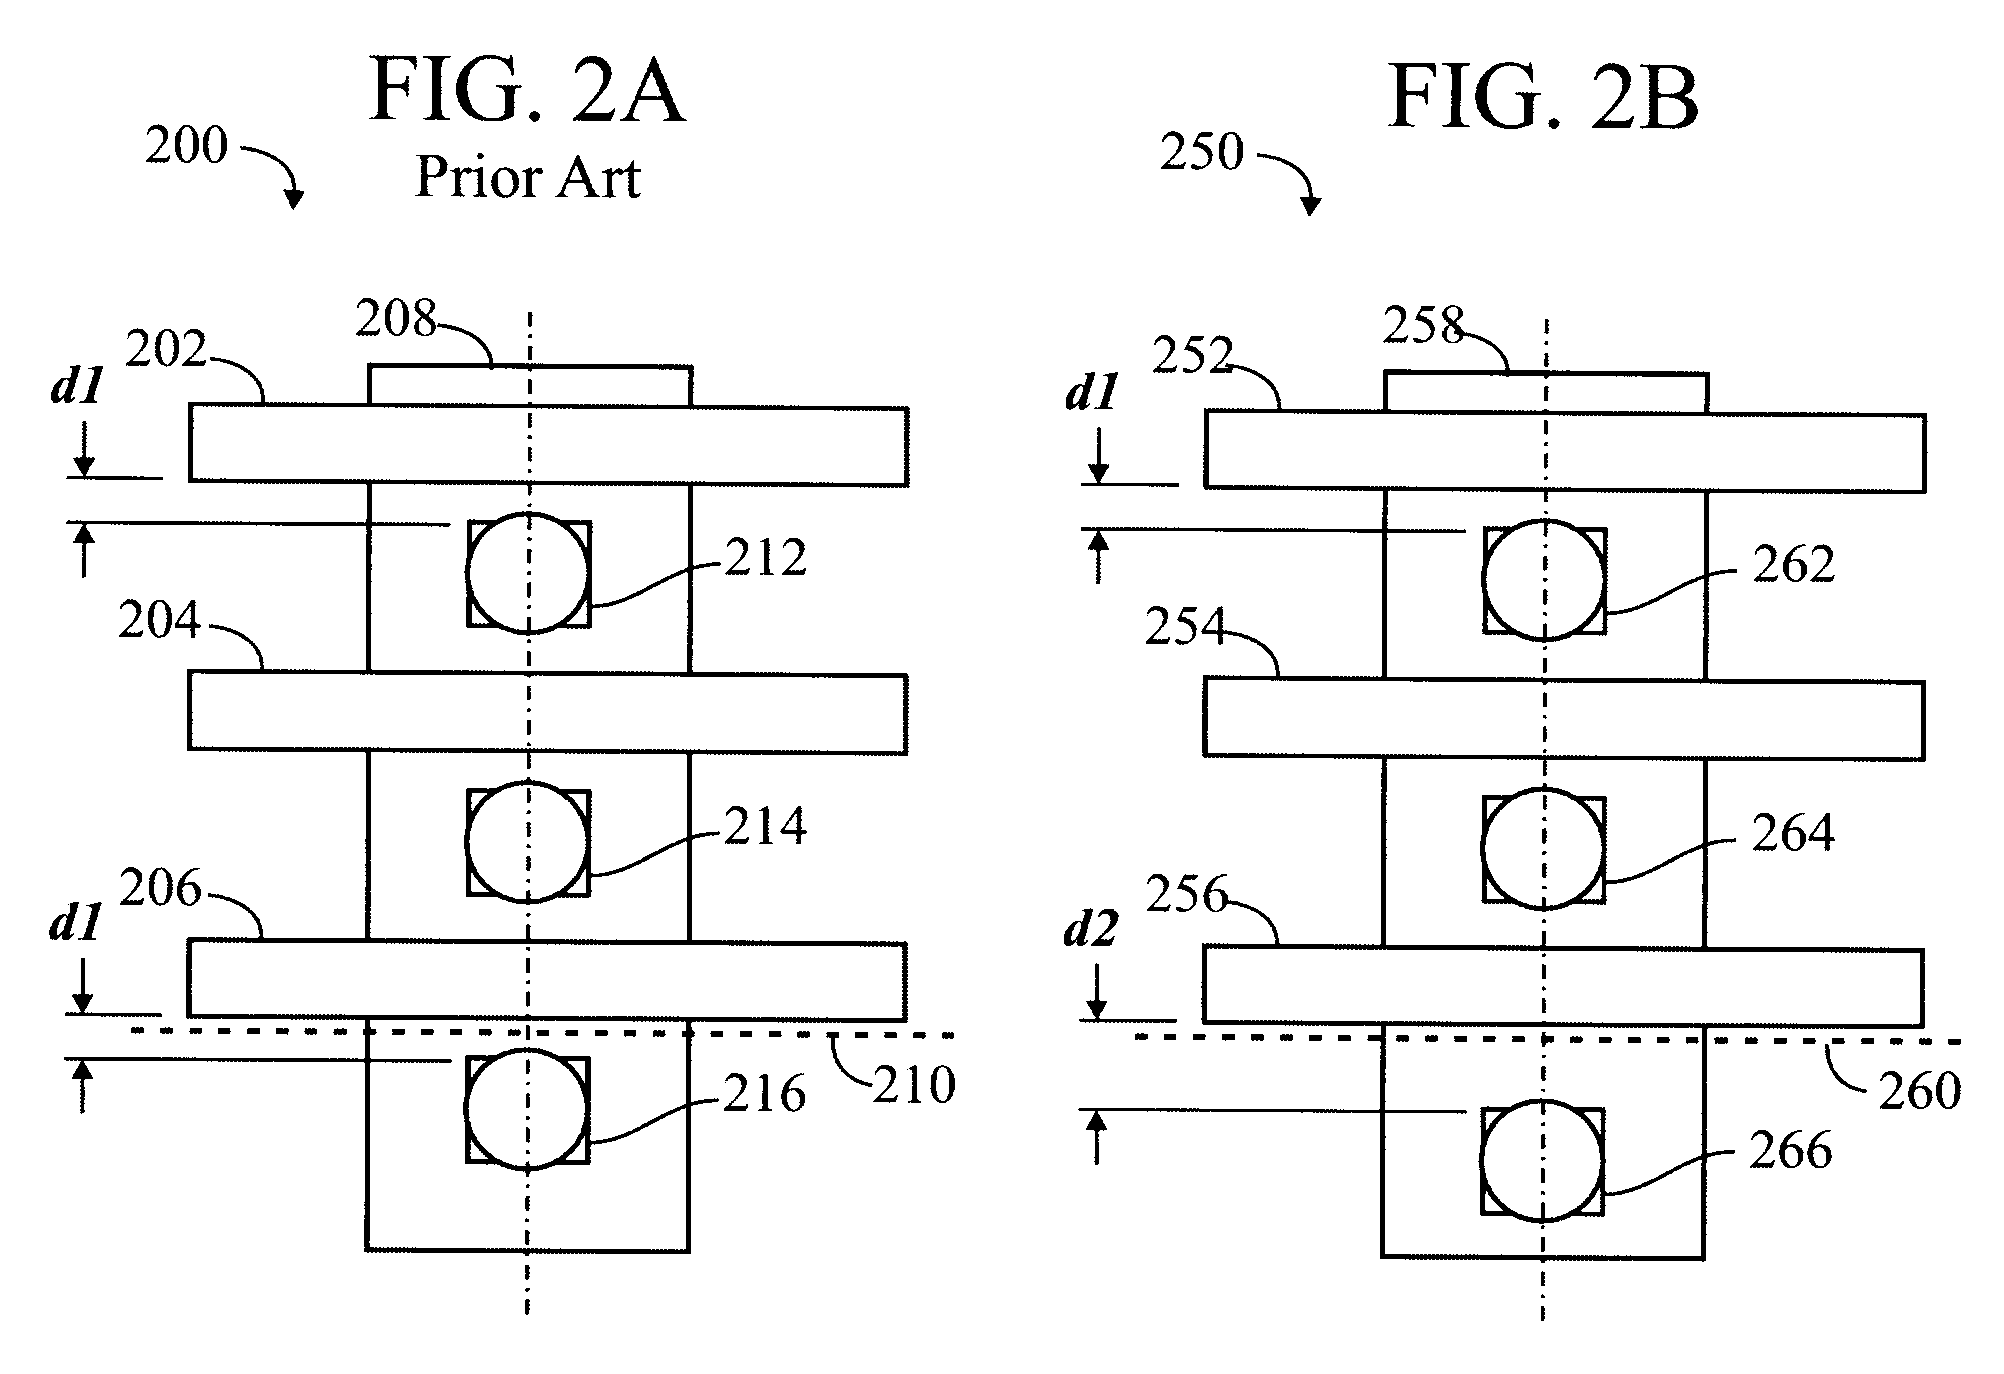 Placement and optimization of process dummy cells